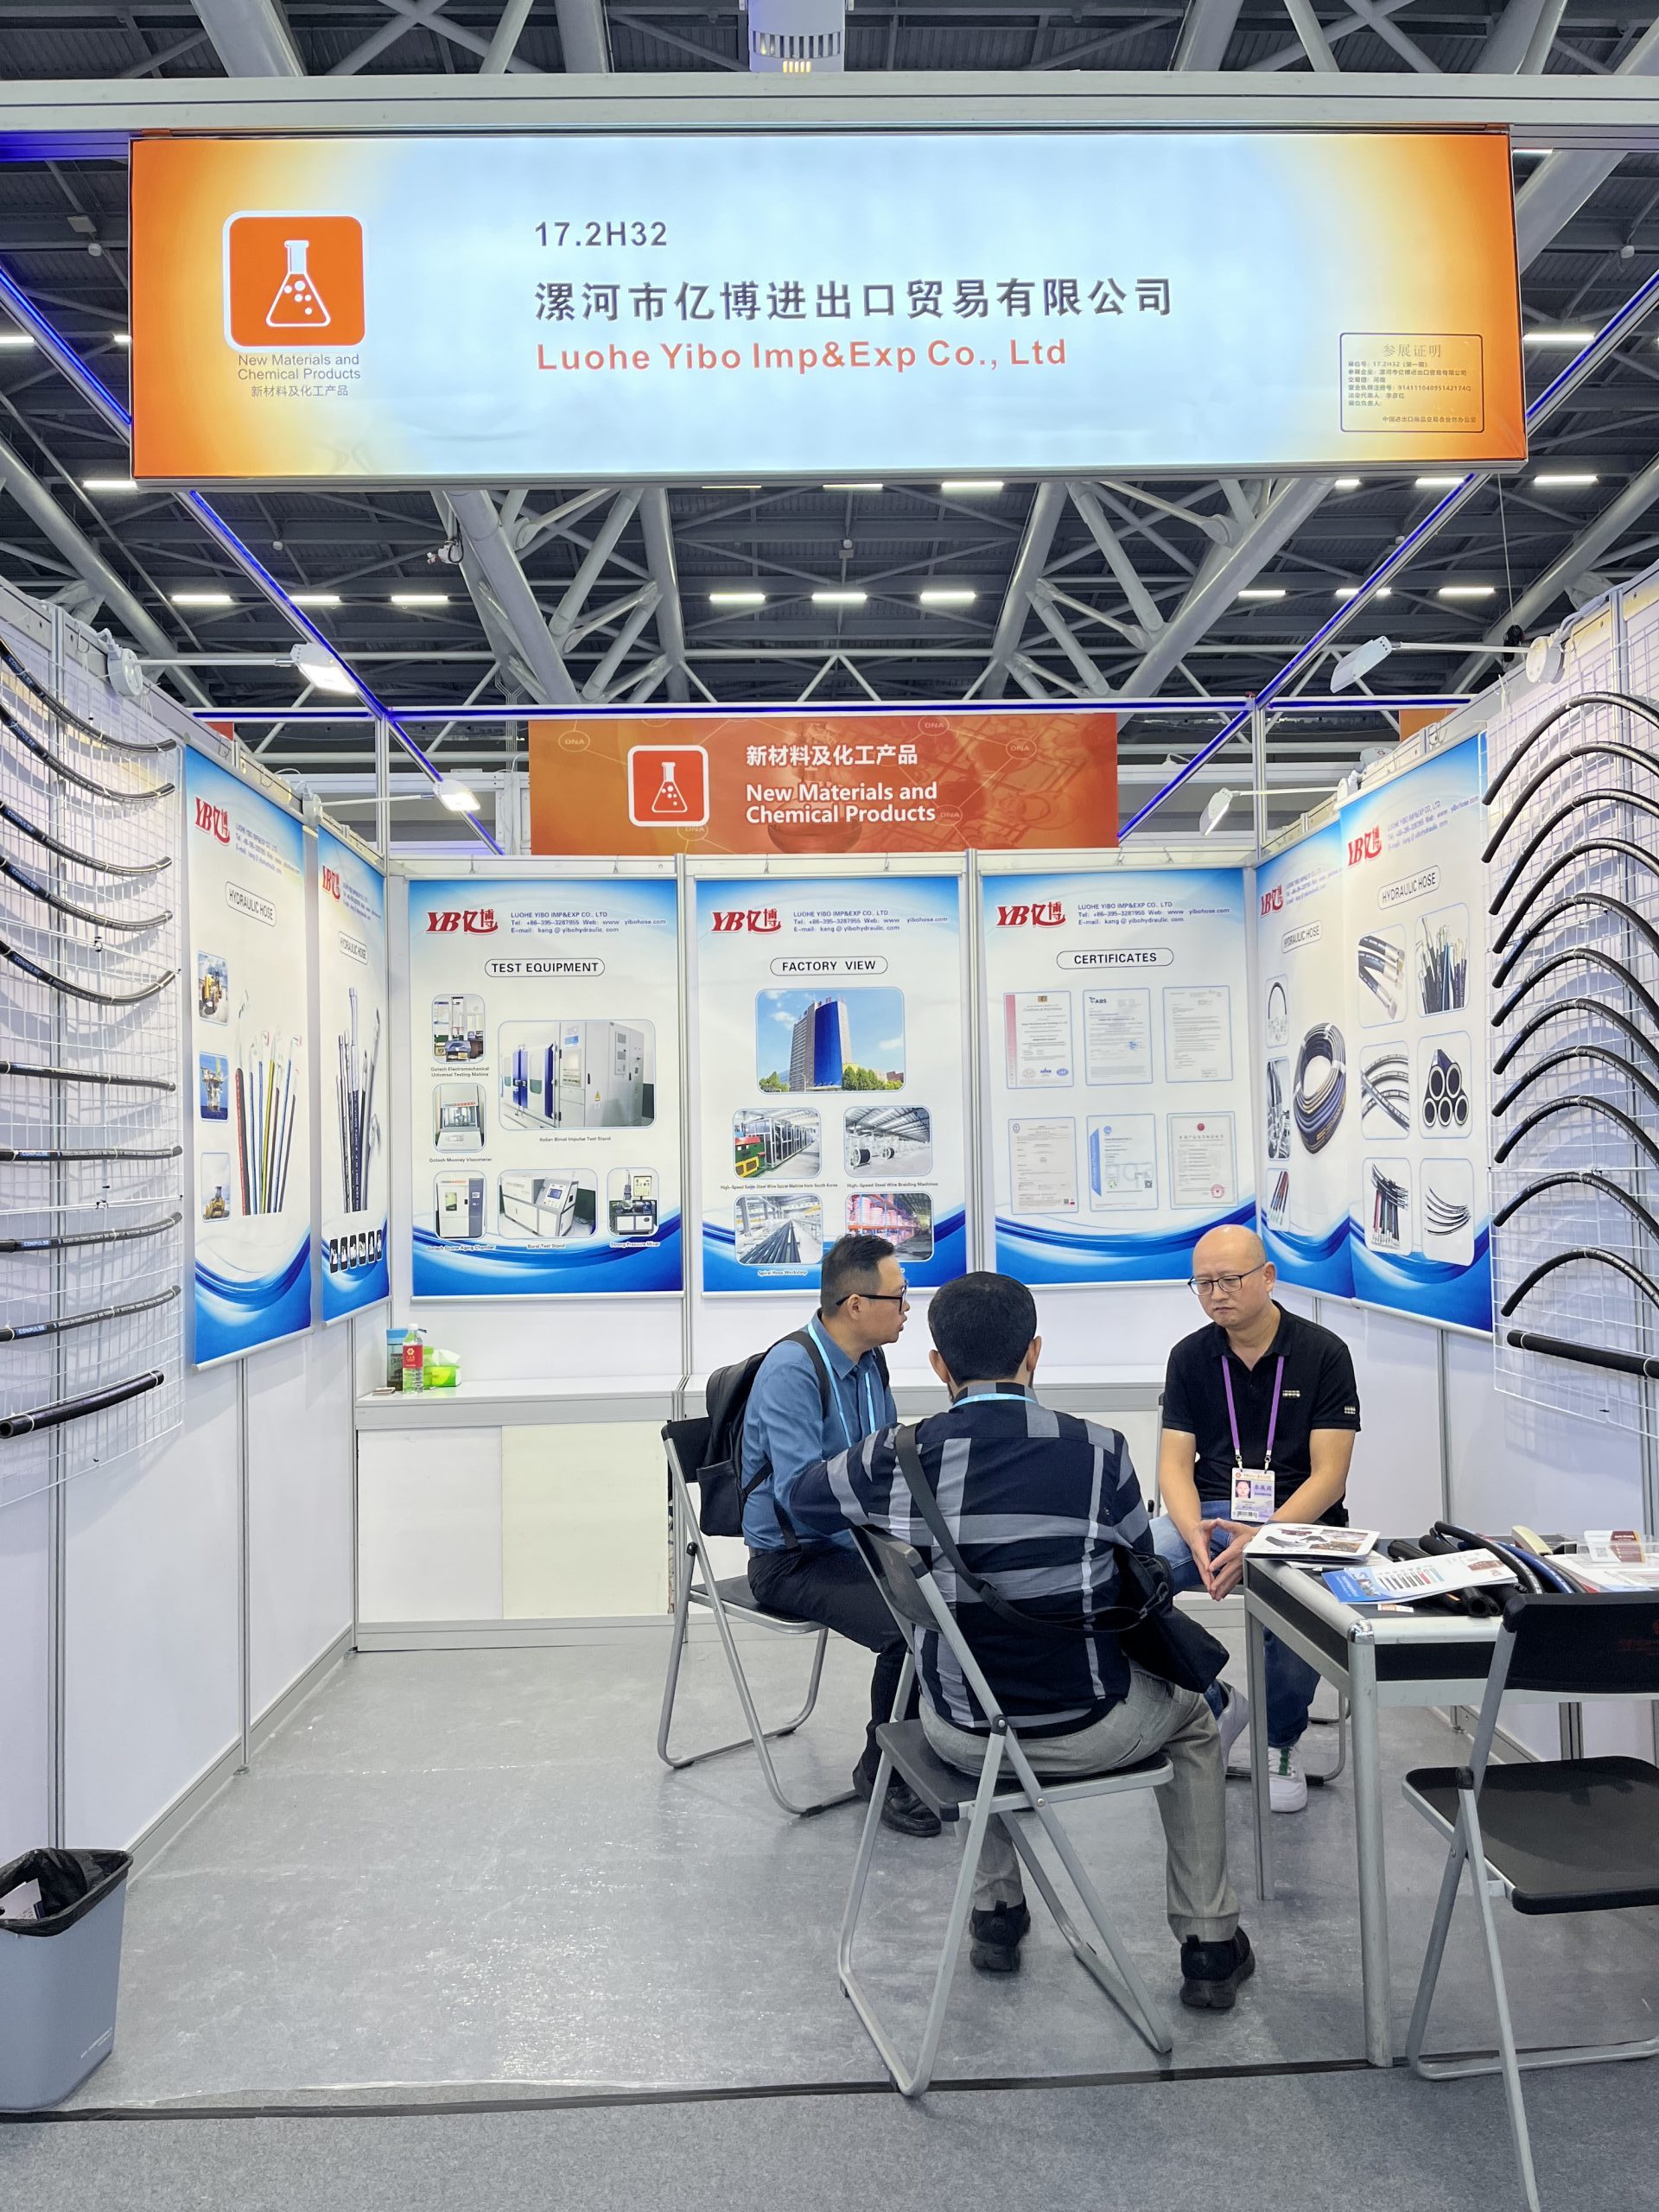 Luohe Yibo Imp&Exp Co., Ltd. attended 134th Canton Fair